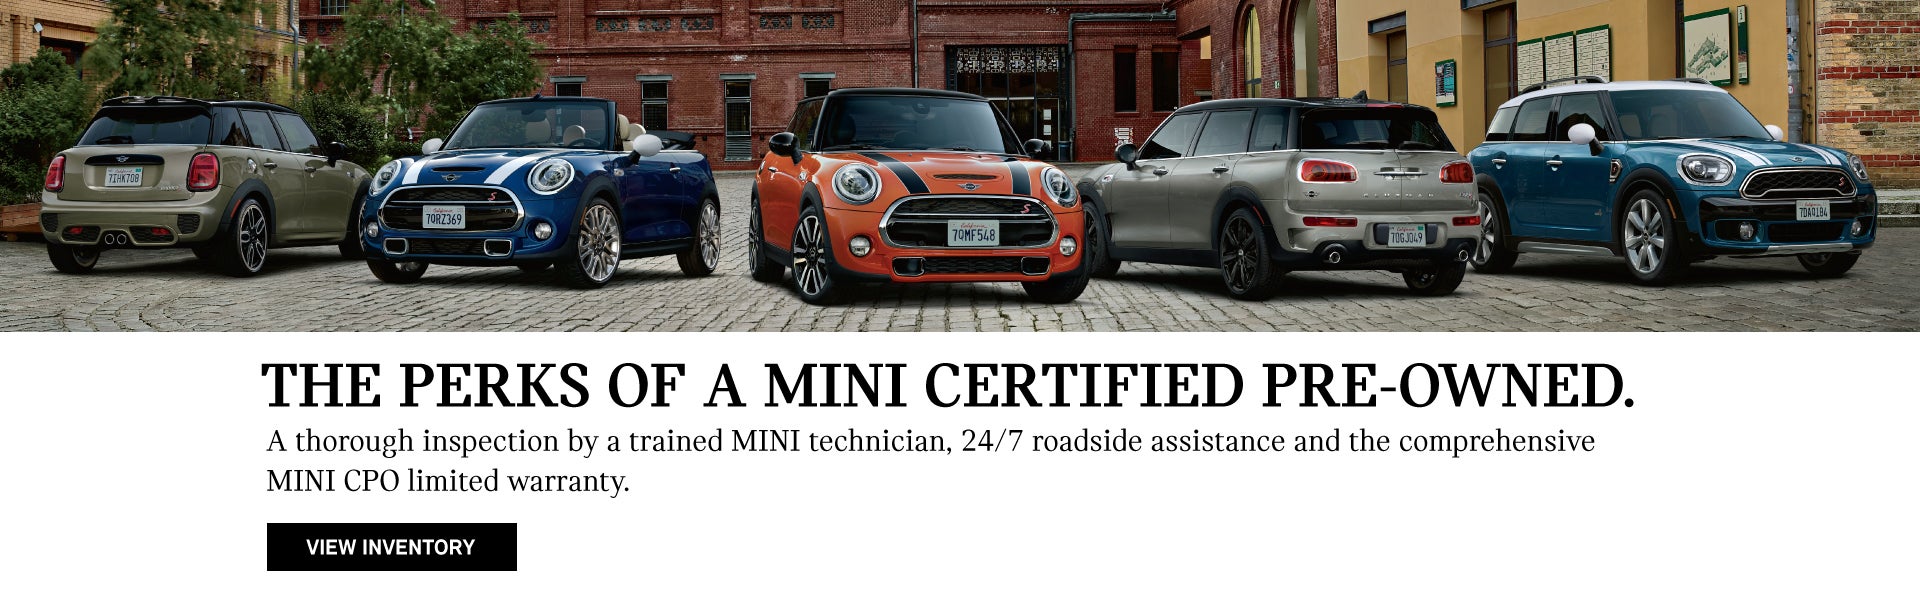 THERE ARE PERKS TO HAVING A MINI CERTIFIED PRE-OWNED VEHICLE